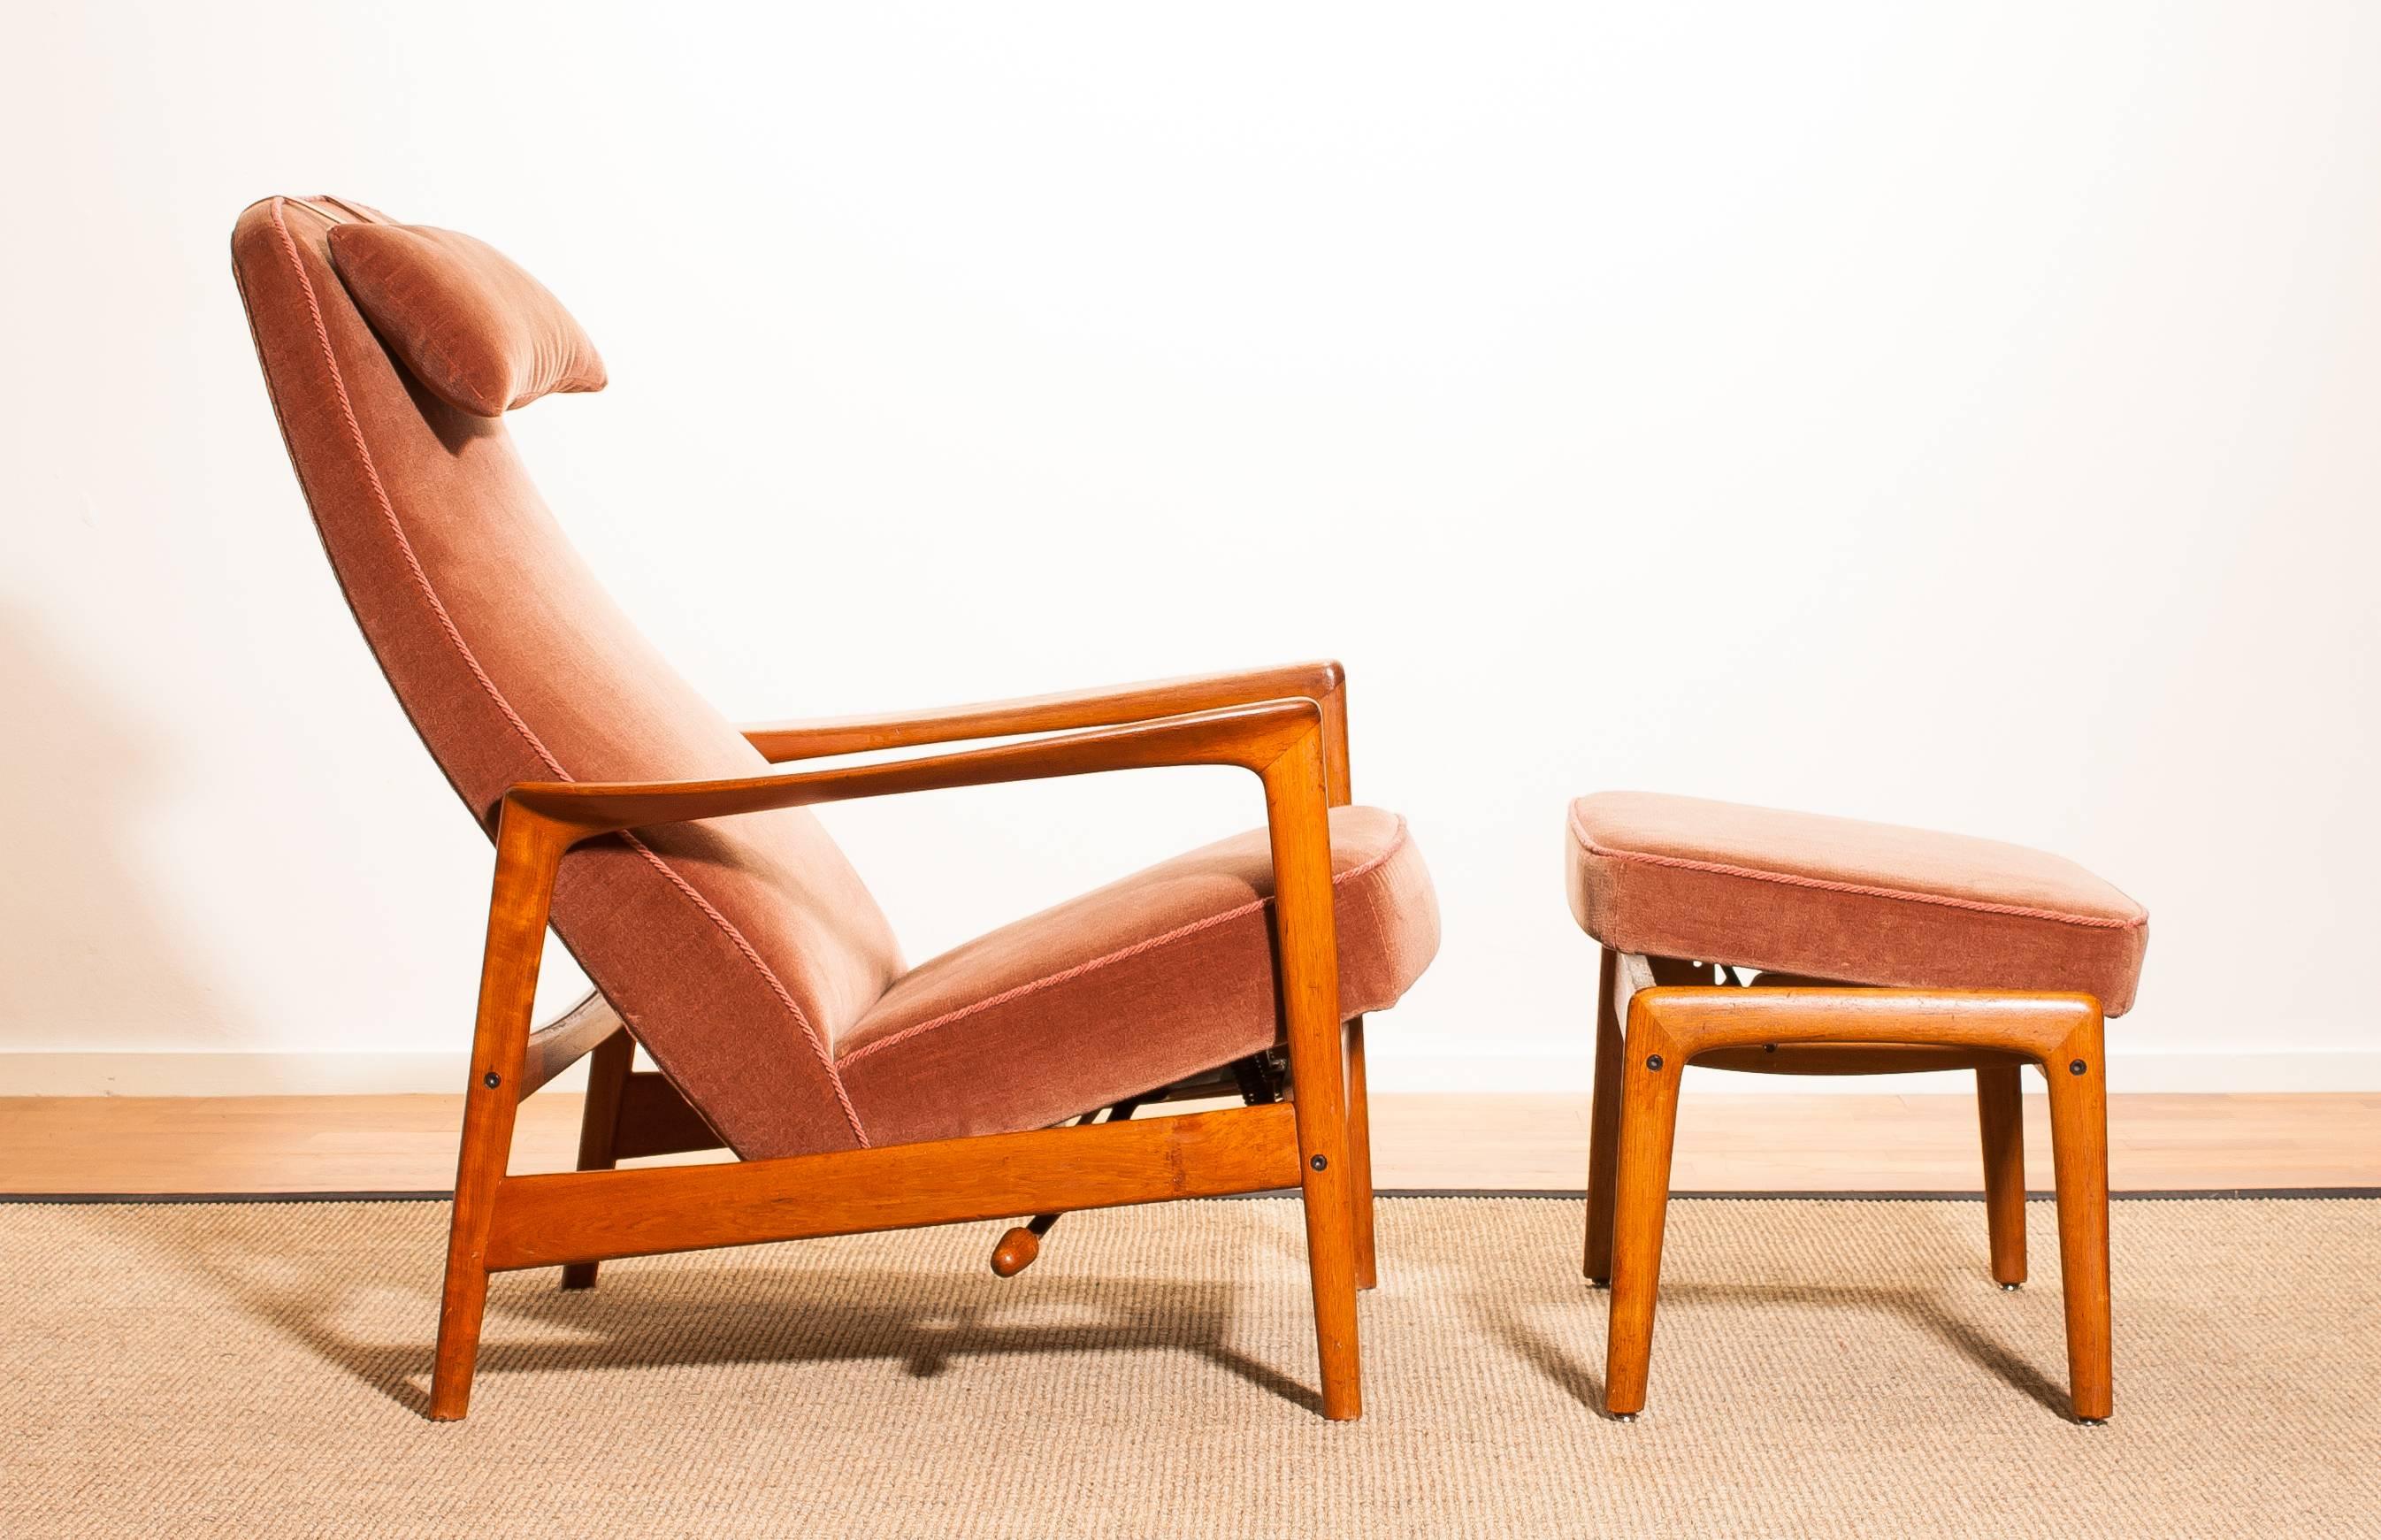 Midcentury teak lounge chair and ottoman designed by Folke Ohlsson for DUX. The solid teak frame with the original velours fabric is in mint condition. (Chair and ottoman)
This very comfortable chair with rocking motion (eight adjustable positions)